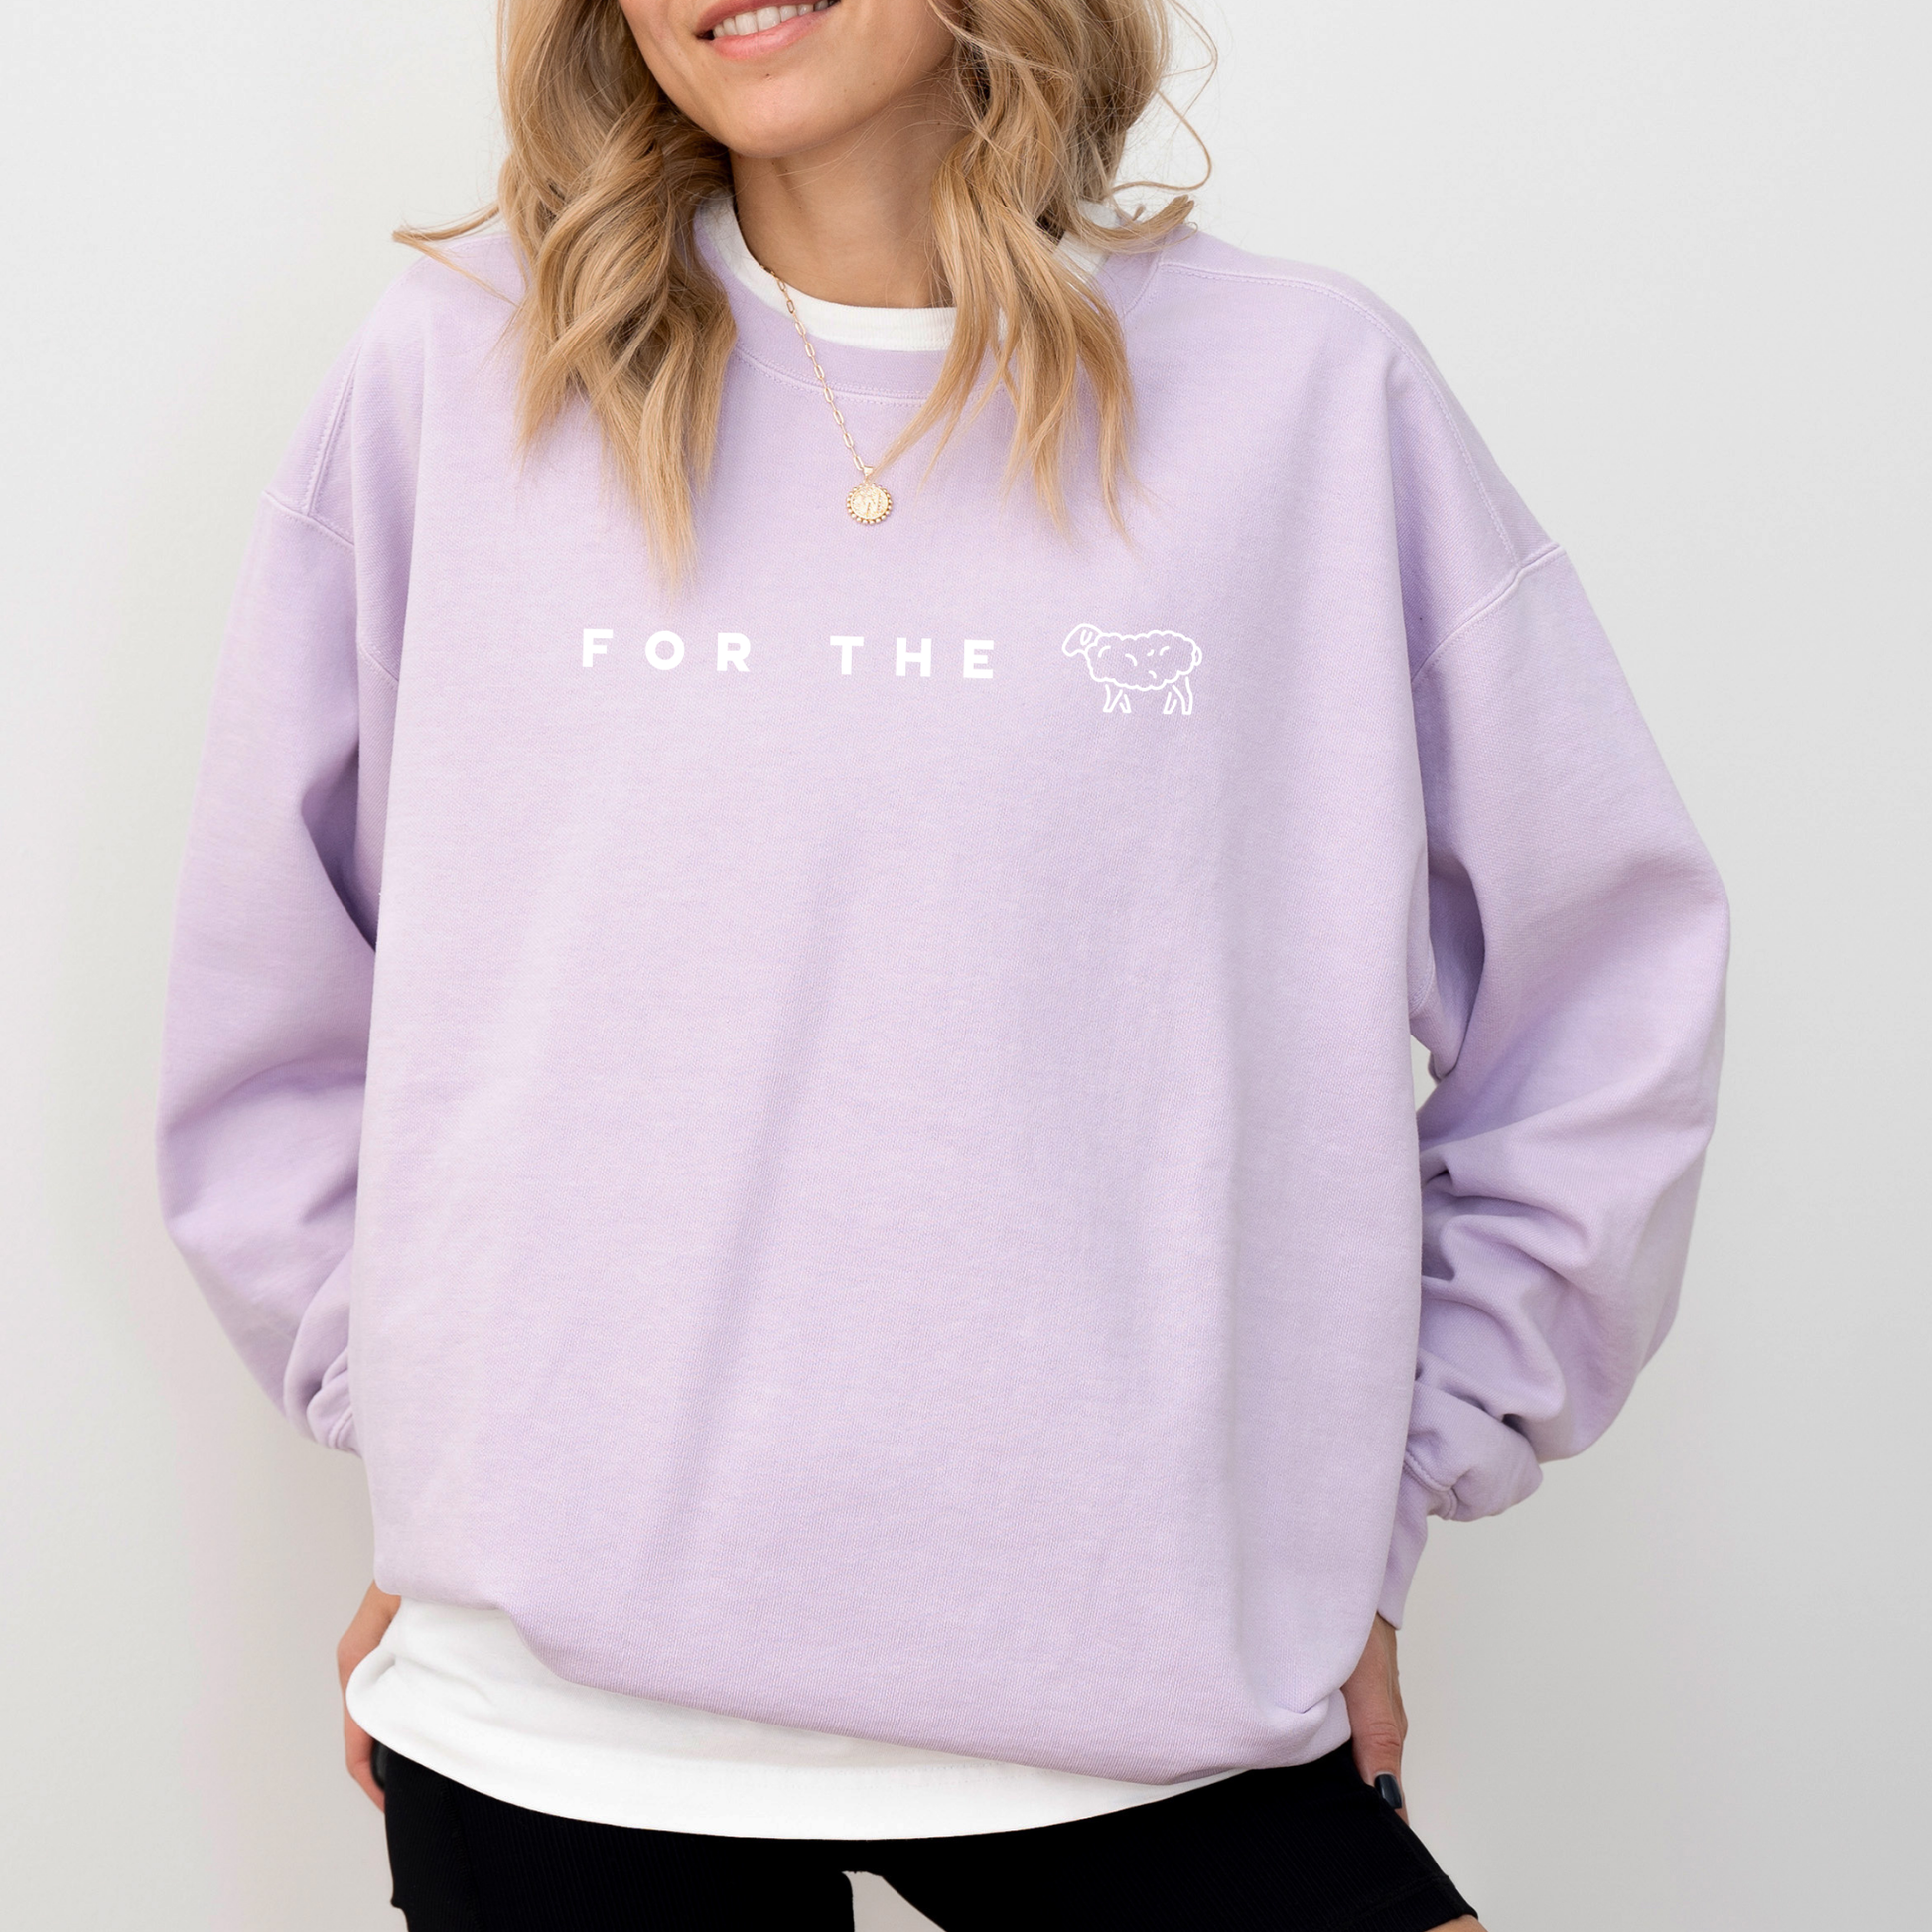 Leaves the 99 For the One Christian Sweatshirt Comfort Colors Orchid